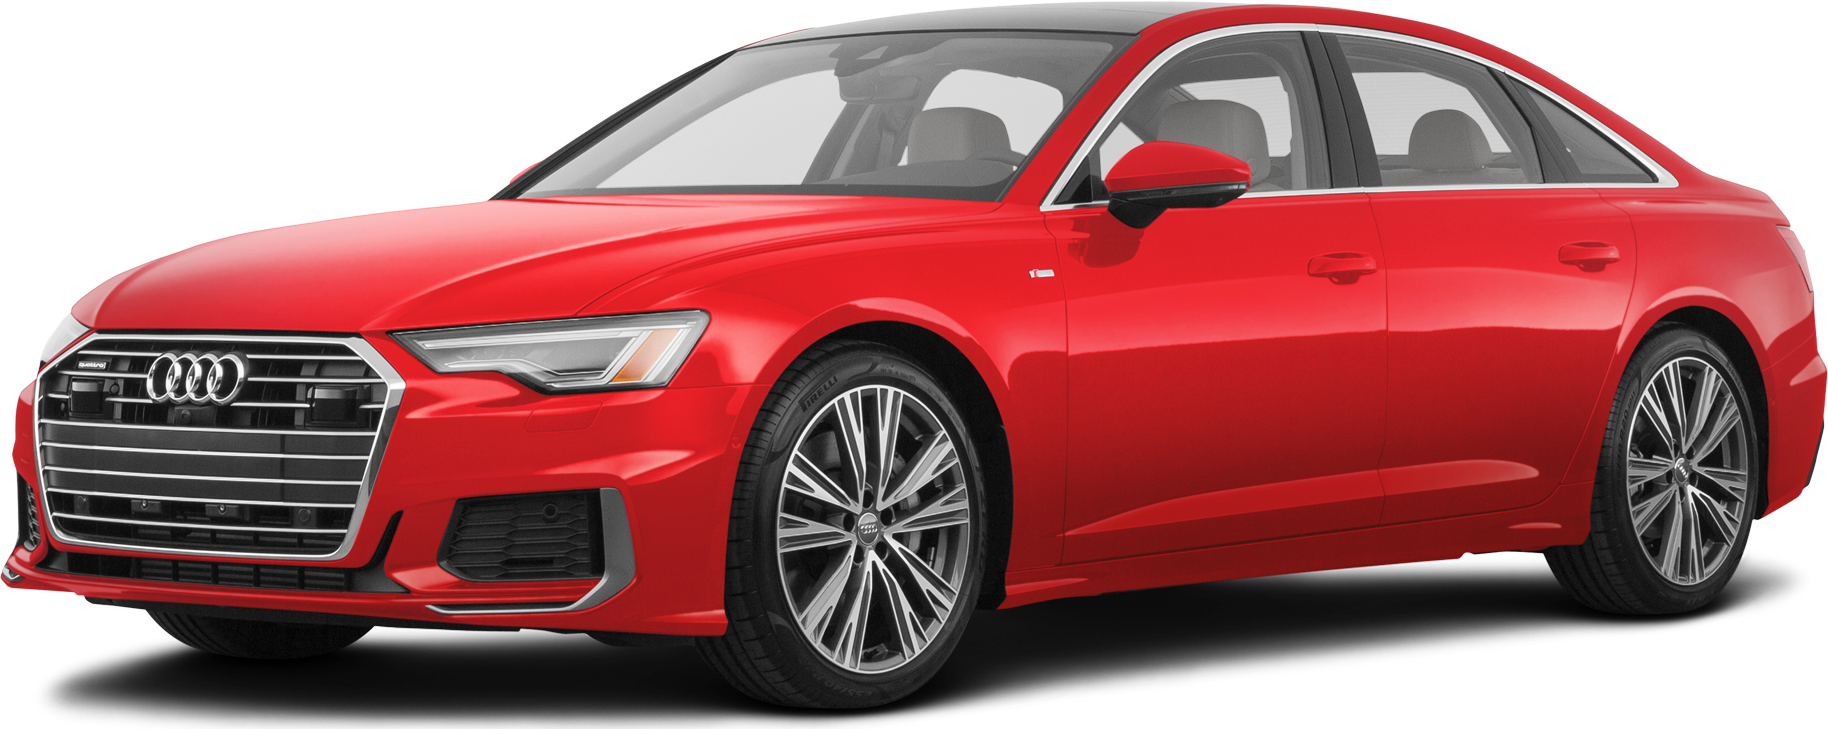 https://file.kelleybluebookimages.com/kbb/base/evox/CP/13293/2019-Audi-A6-front_13293_032_1828x729_Y1Y1_cropped.png